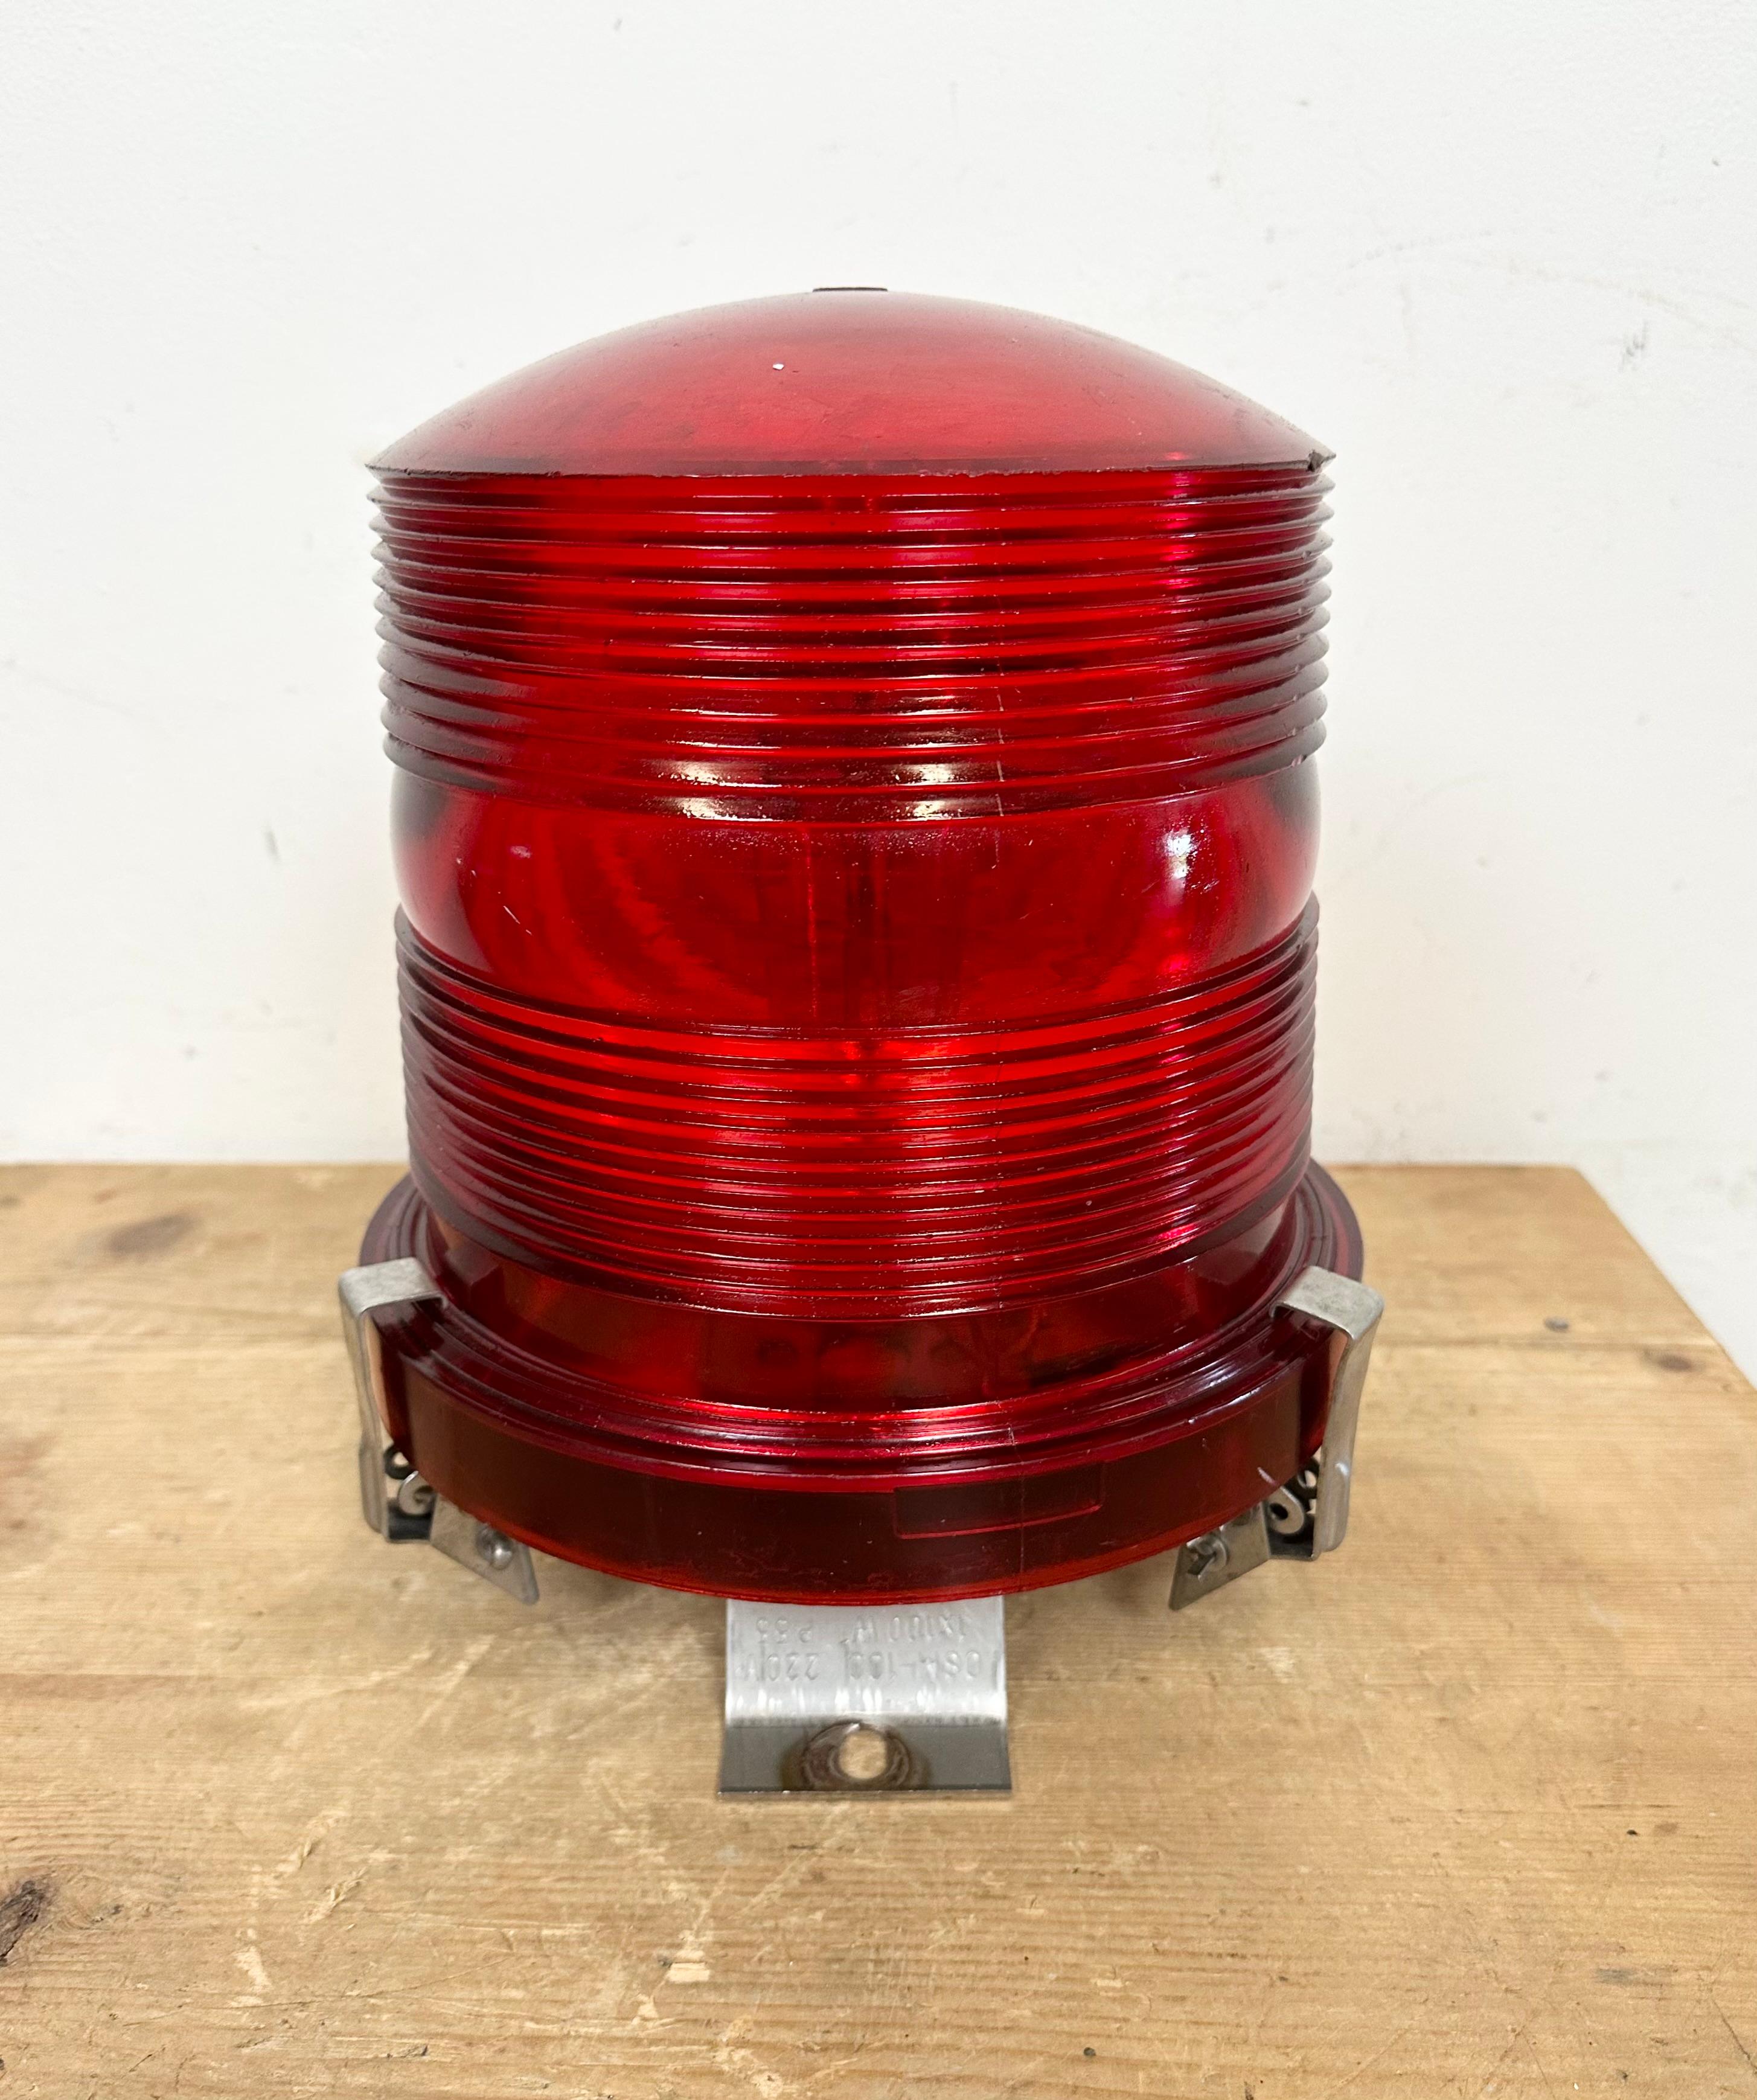 Polish Vintage Airport Runway Light, 1960s For Sale